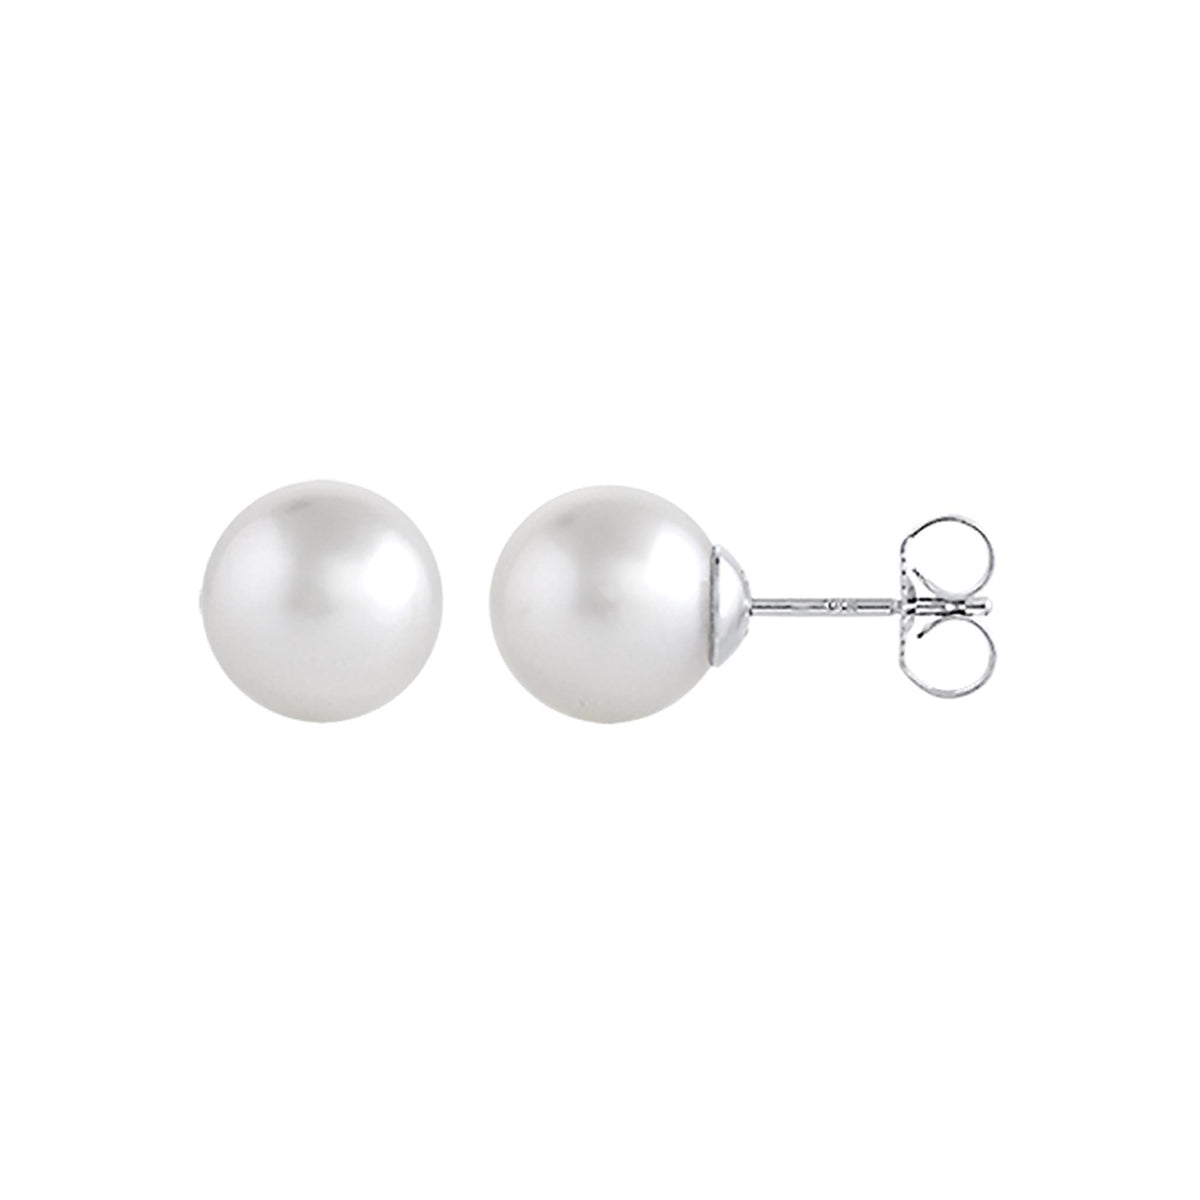 14Kt White Gold Stud Earrings With 9mm Akoya Cultured Pearl